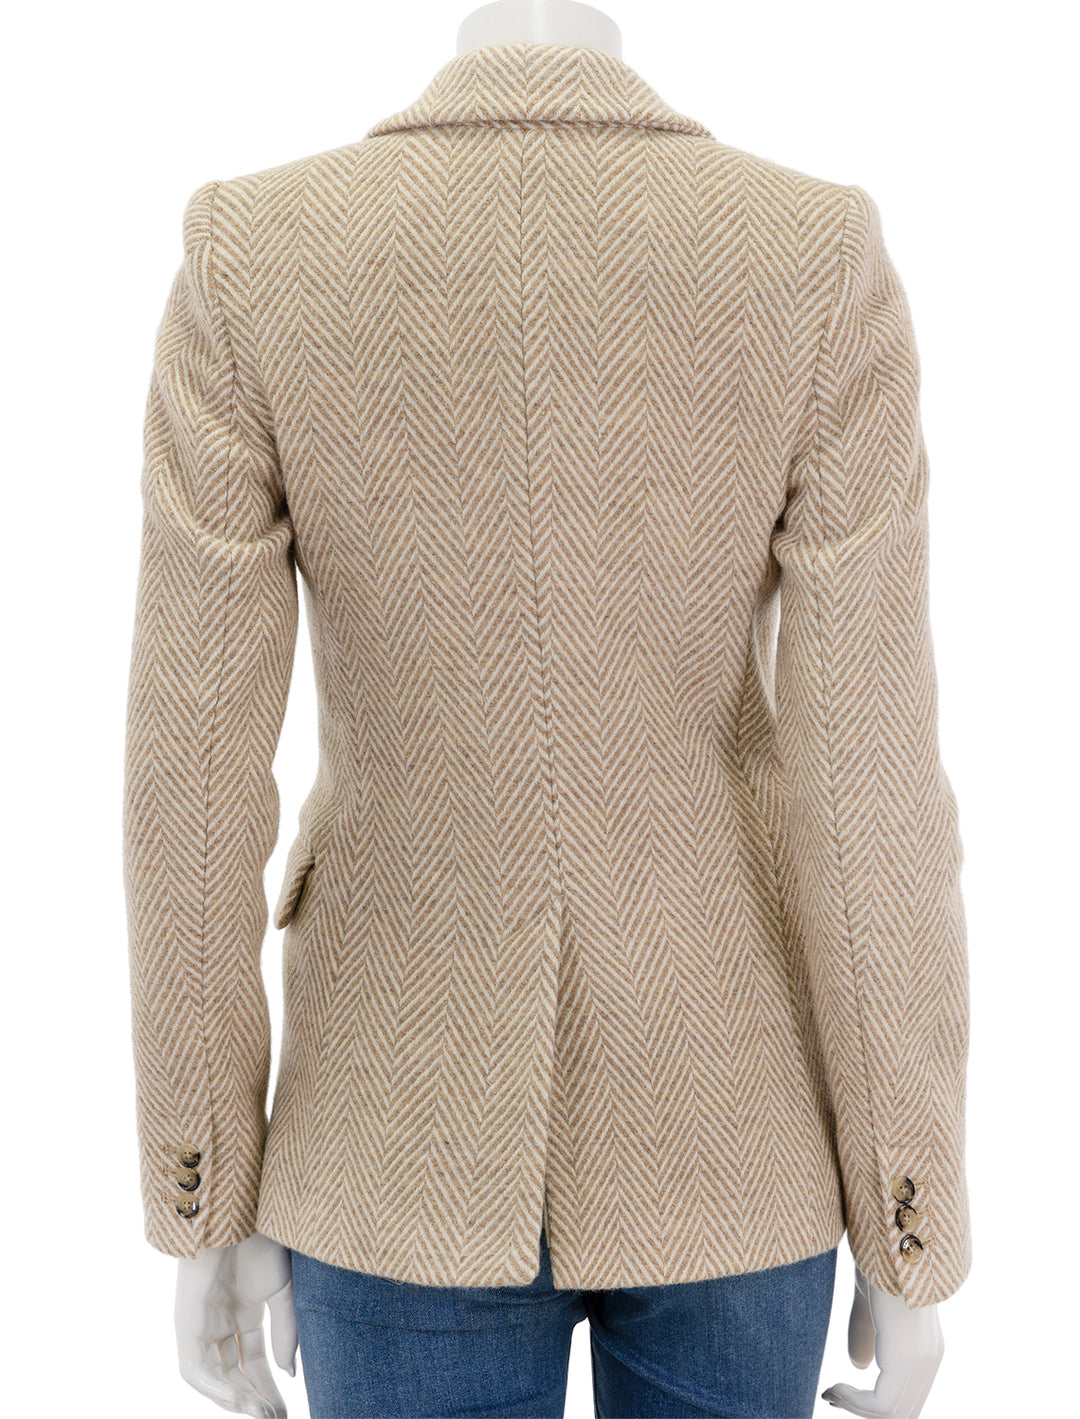 Back view of Isabel Marant Etoile's kerstin blazer in toffee.